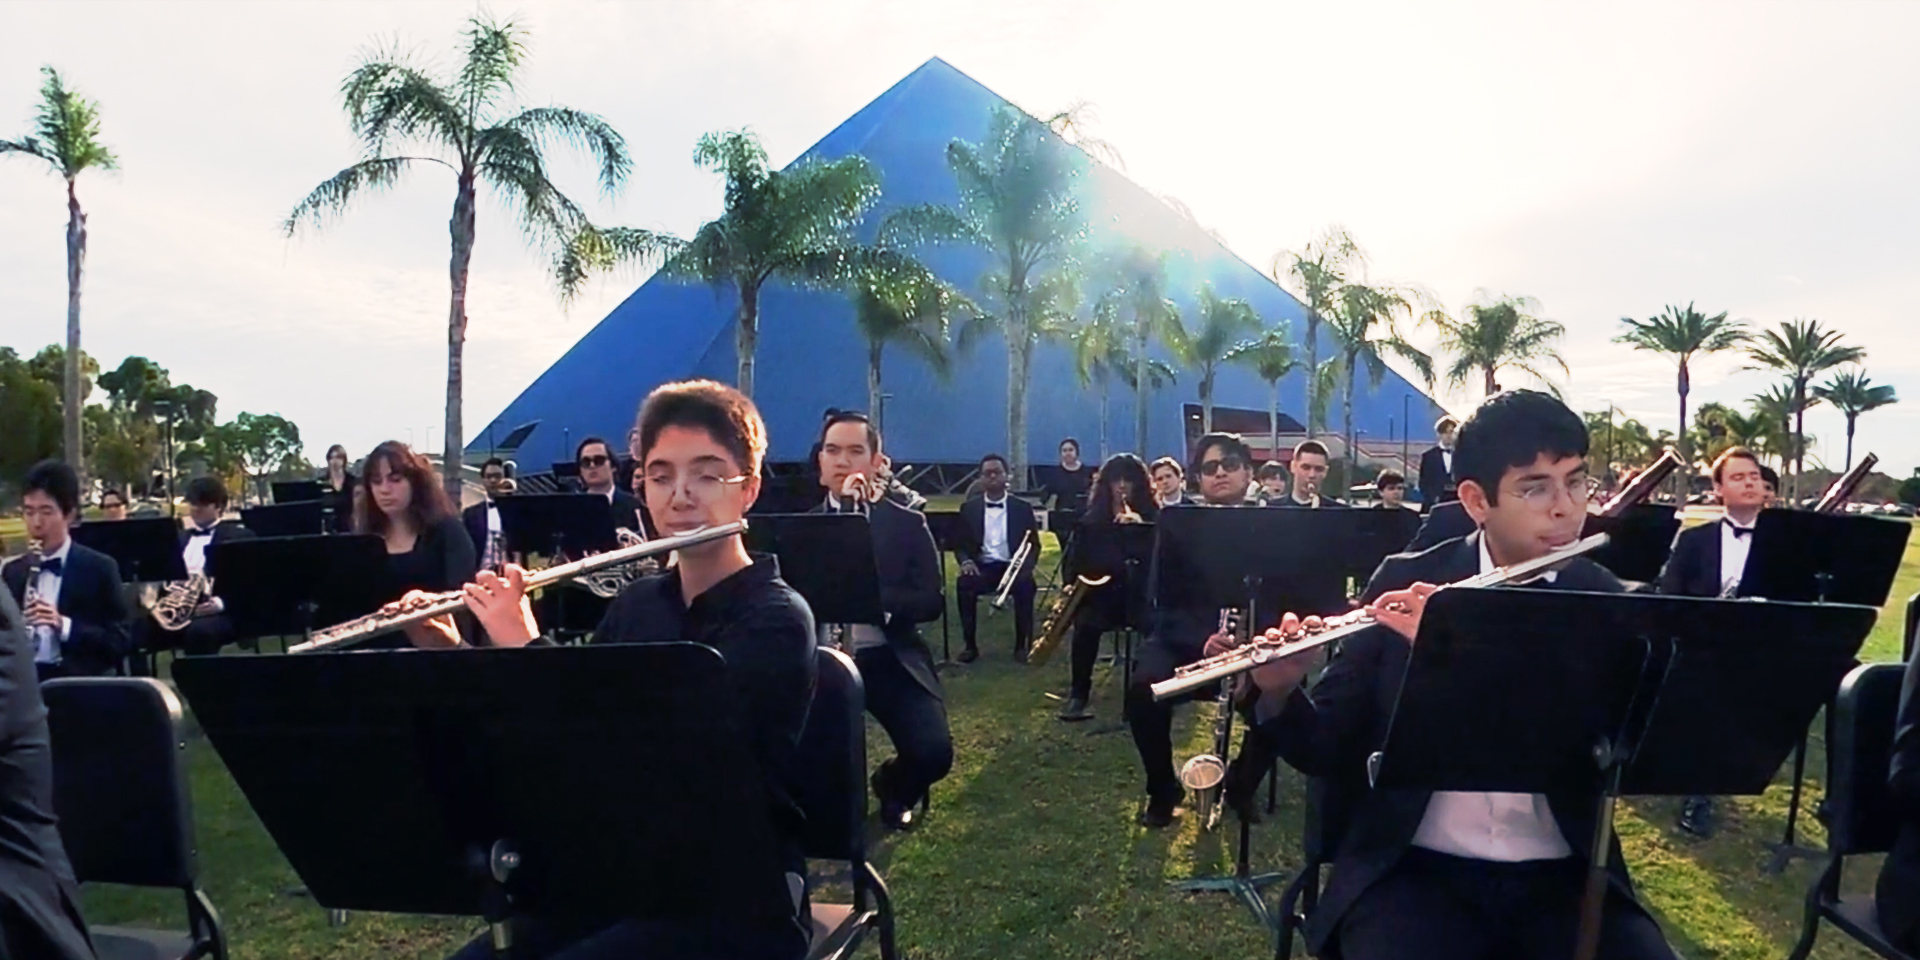 Bob Cole Conservatory Concert Band in front of the Pyramid